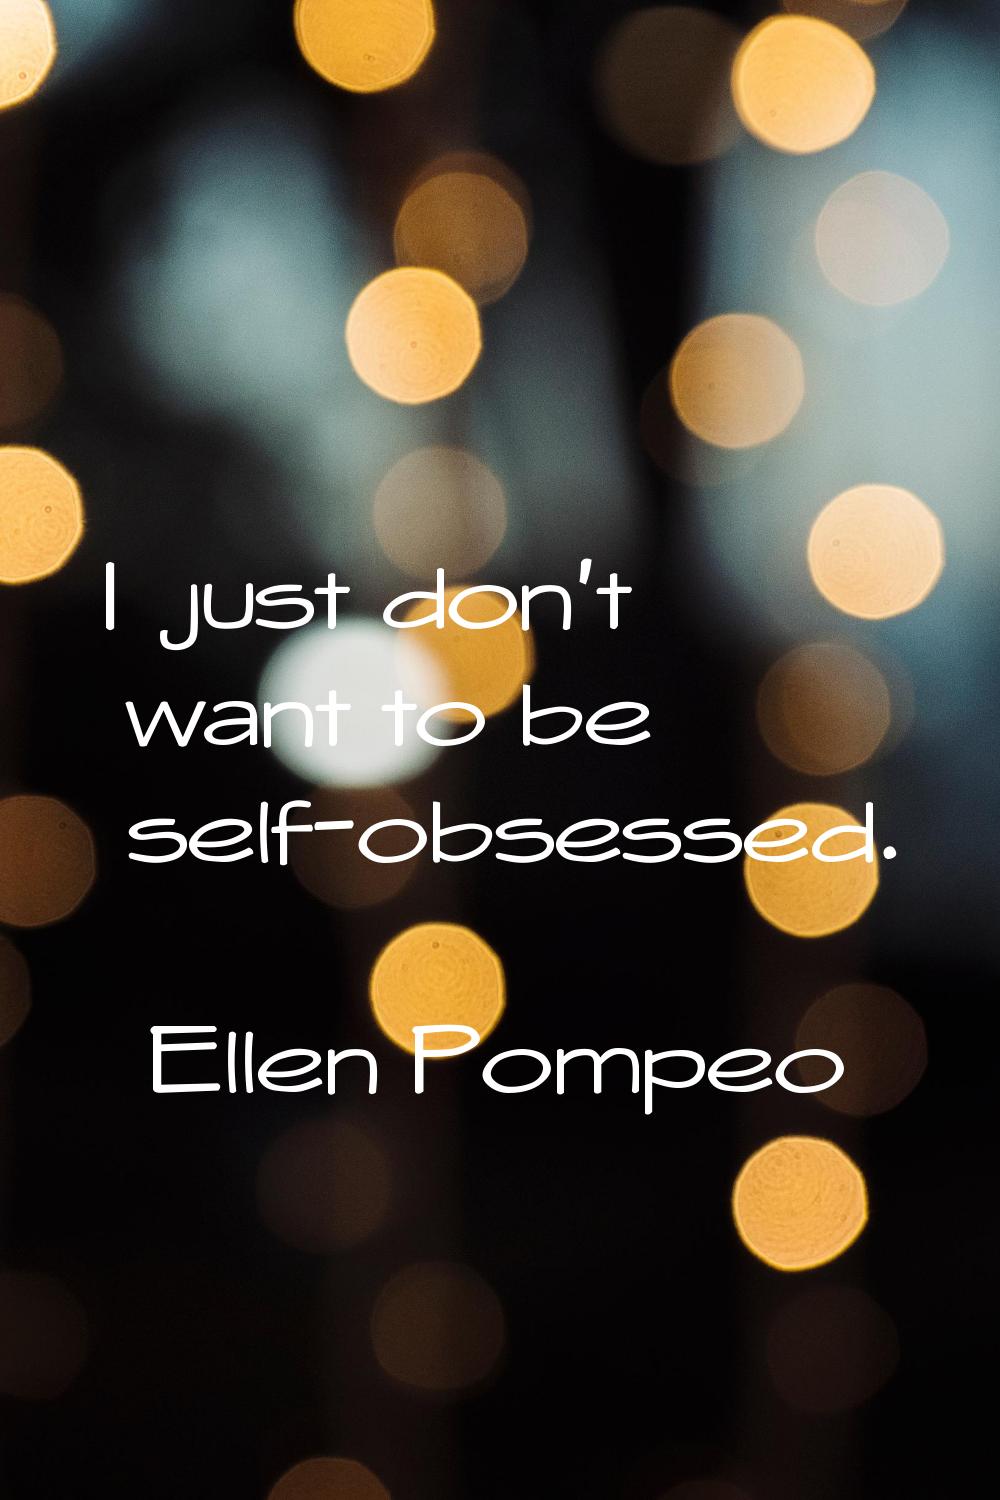 I just don't want to be self-obsessed.